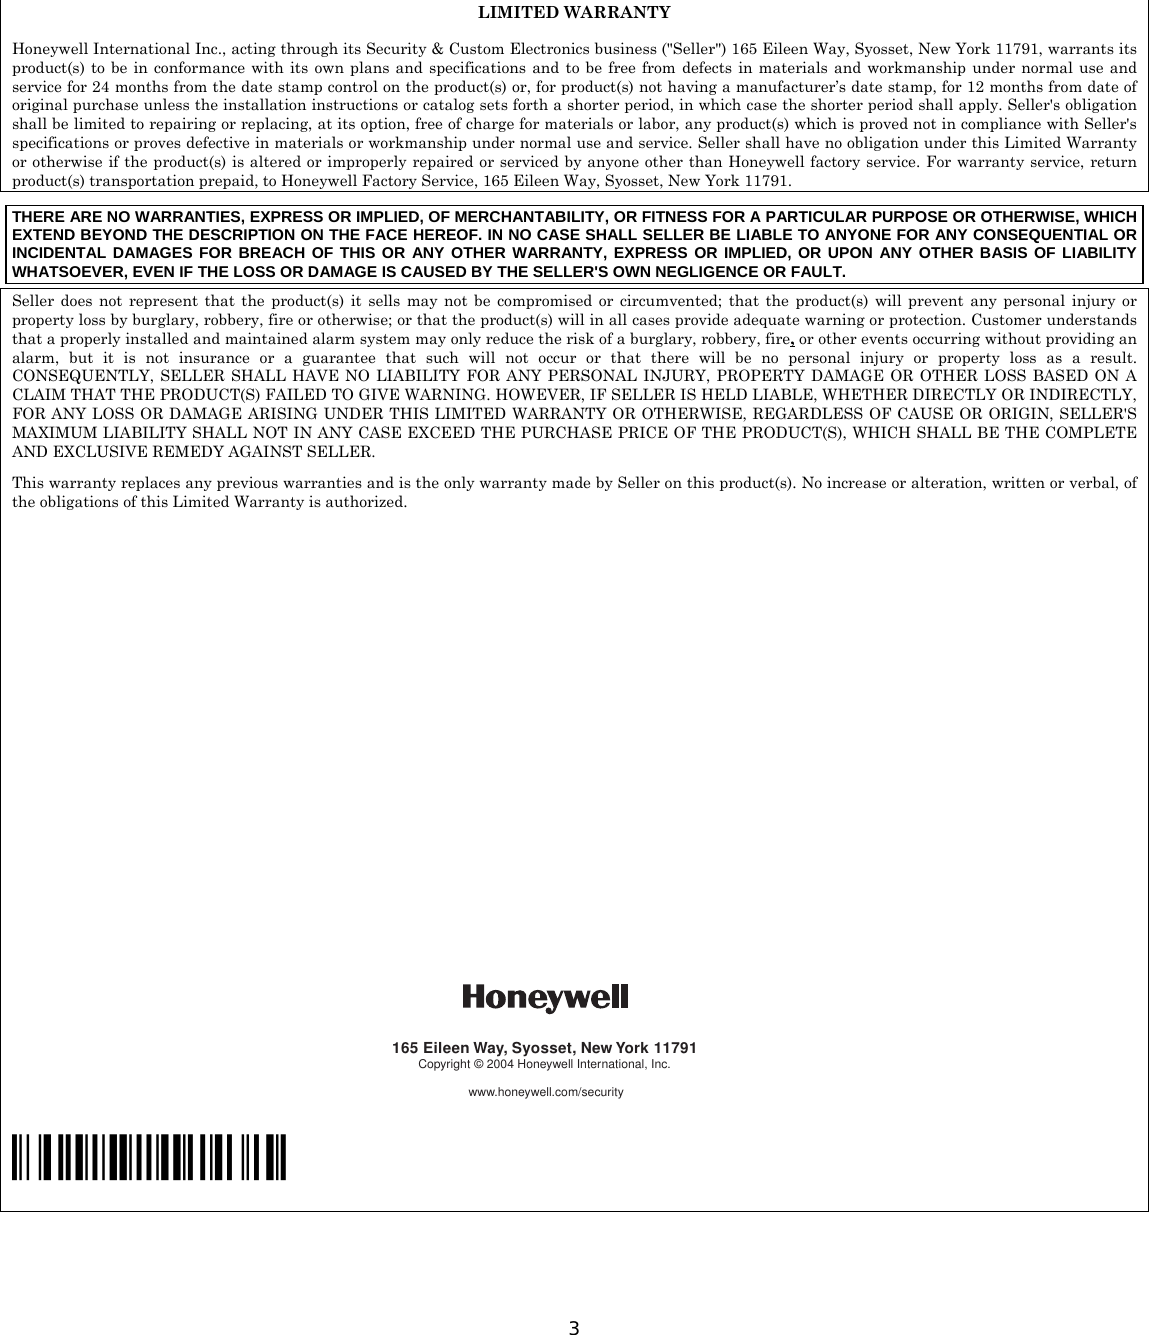  3       LIMITED WARRANTY  Honeywell International Inc., acting through its Security &amp; Custom Electronics business (&quot;Seller&quot;) 165 Eileen Way, Syosset, New York 11791, warrants its product(s) to be in conformance with its own plans and specifications and to be free from defects in materials and workmanship under normal use and service for 24 months from the date stamp control on the product(s) or, for product(s) not having a manufacturer’s date stamp, for 12 months from date of original purchase unless the installation instructions or catalog sets forth a shorter period, in which case the shorter period shall apply. Seller&apos;s obligation shall be limited to repairing or replacing, at its option, free of charge for materials or labor, any product(s) which is proved not in compliance with Seller&apos;s specifications or proves defective in materials or workmanship under normal use and service. Seller shall have no obligation under this Limited Warranty or otherwise if the product(s) is altered or improperly repaired or serviced by anyone other than Honeywell factory service. For warranty service, return product(s) transportation prepaid, to Honeywell Factory Service, 165 Eileen Way, Syosset, New York 11791. THERE ARE NO WARRANTIES, EXPRESS OR IMPLIED, OF MERCHANTABILITY, OR FITNESS FOR A PARTICULAR PURPOSE OR OTHERWISE, WHICH EXTEND BEYOND THE DESCRIPTION ON THE FACE HEREOF. IN NO CASE SHALL SELLER BE LIABLE TO ANYONE FOR ANY CONSEQUENTIAL OR INCIDENTAL DAMAGES FOR BREACH OF THIS OR ANY OTHER WARRANTY, EXPRESS OR IMPLIED, OR UPON ANY OTHER BASIS OF LIABILITY WHATSOEVER, EVEN IF THE LOSS OR DAMAGE IS CAUSED BY THE SELLER&apos;S OWN NEGLIGENCE OR FAULT. Seller does not represent that the product(s) it sells may not be compromised or circumvented; that the product(s) will prevent any personal injury or property loss by burglary, robbery, fire or otherwise; or that the product(s) will in all cases provide adequate warning or protection. Customer understands that a properly installed and maintained alarm system may only reduce the risk of a burglary, robbery, fire, or other events occurring without providing an alarm, but it is not insurance or a guarantee that such will not occur or that there will be no personal injury or property loss as a result. CONSEQUENTLY, SELLER SHALL HAVE NO LIABILITY FOR ANY PERSONAL INJURY, PROPERTY DAMAGE OR OTHER LOSS BASED ON A CLAIM THAT THE PRODUCT(S) FAILED TO GIVE WARNING. HOWEVER, IF SELLER IS HELD LIABLE, WHETHER DIRECTLY OR INDIRECTLY, FOR ANY LOSS OR DAMAGE ARISING UNDER THIS LIMITED WARRANTY OR OTHERWISE, REGARDLESS OF CAUSE OR ORIGIN, SELLER&apos;S MAXIMUM LIABILITY SHALL NOT IN ANY CASE EXCEED THE PURCHASE PRICE OF THE PRODUCT(S), WHICH SHALL BE THE COMPLETE AND EXCLUSIVE REMEDY AGAINST SELLER. This warranty replaces any previous warranties and is the only warranty made by Seller on this product(s). No increase or alteration, written or verbal, of the obligations of this Limited Warranty is authorized.                                                                                                                                                                                   165 Eileen Way, Syosset, New York 11791Copyright © 2004 Honeywell International, Inc.www.honeywell.com/security  ÊN6483V3nŠ  